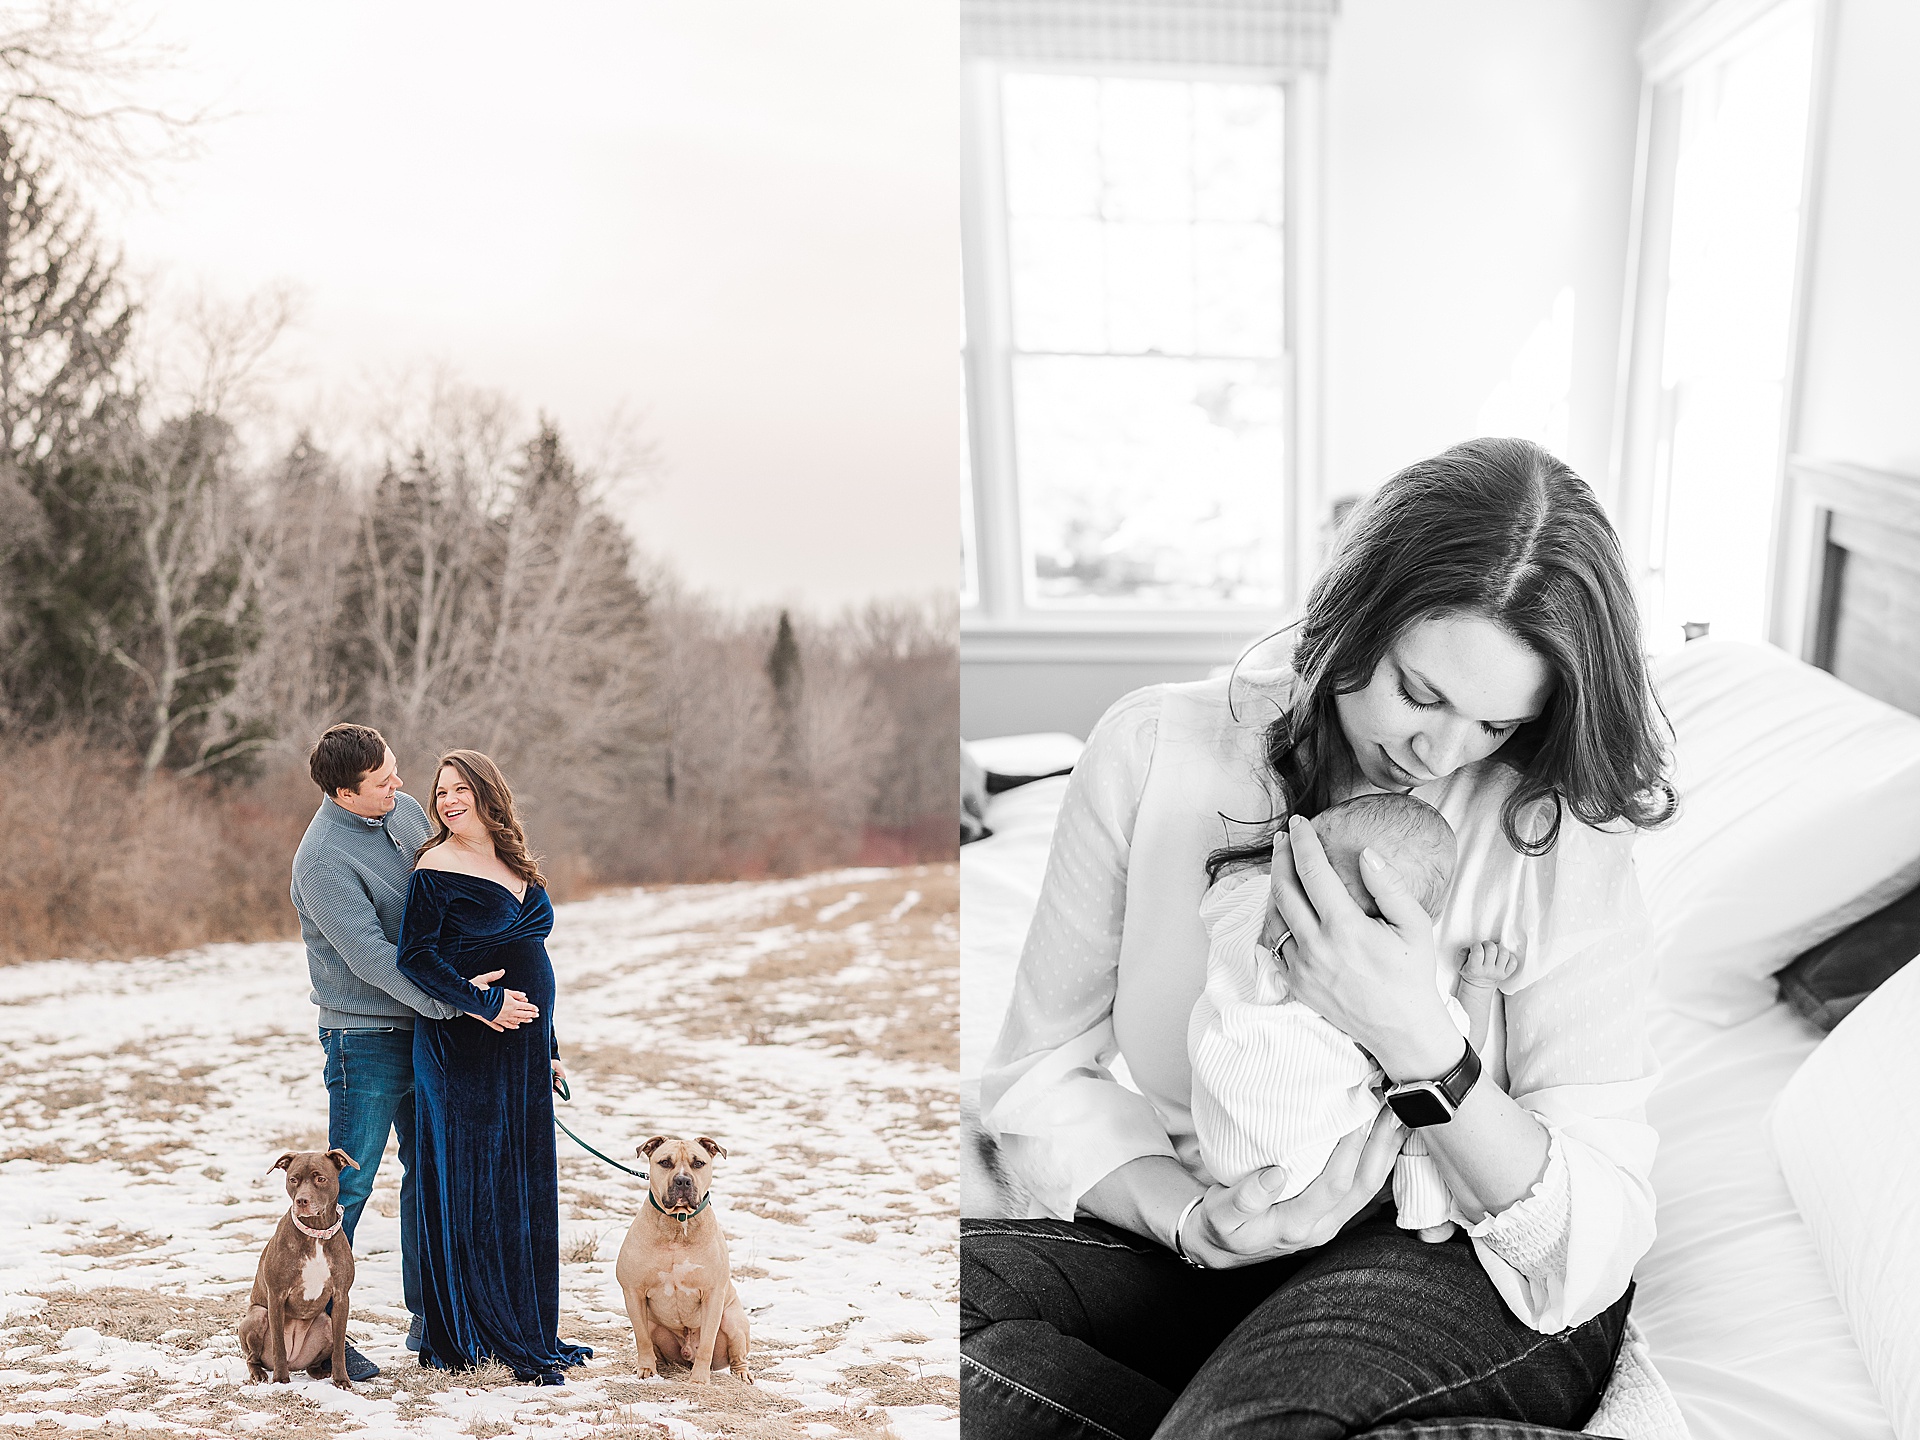 Winter maternity session with Sara Sniderman Photography at Cow Common, Wayland Massachusetts and newborn session in Sudbury MA